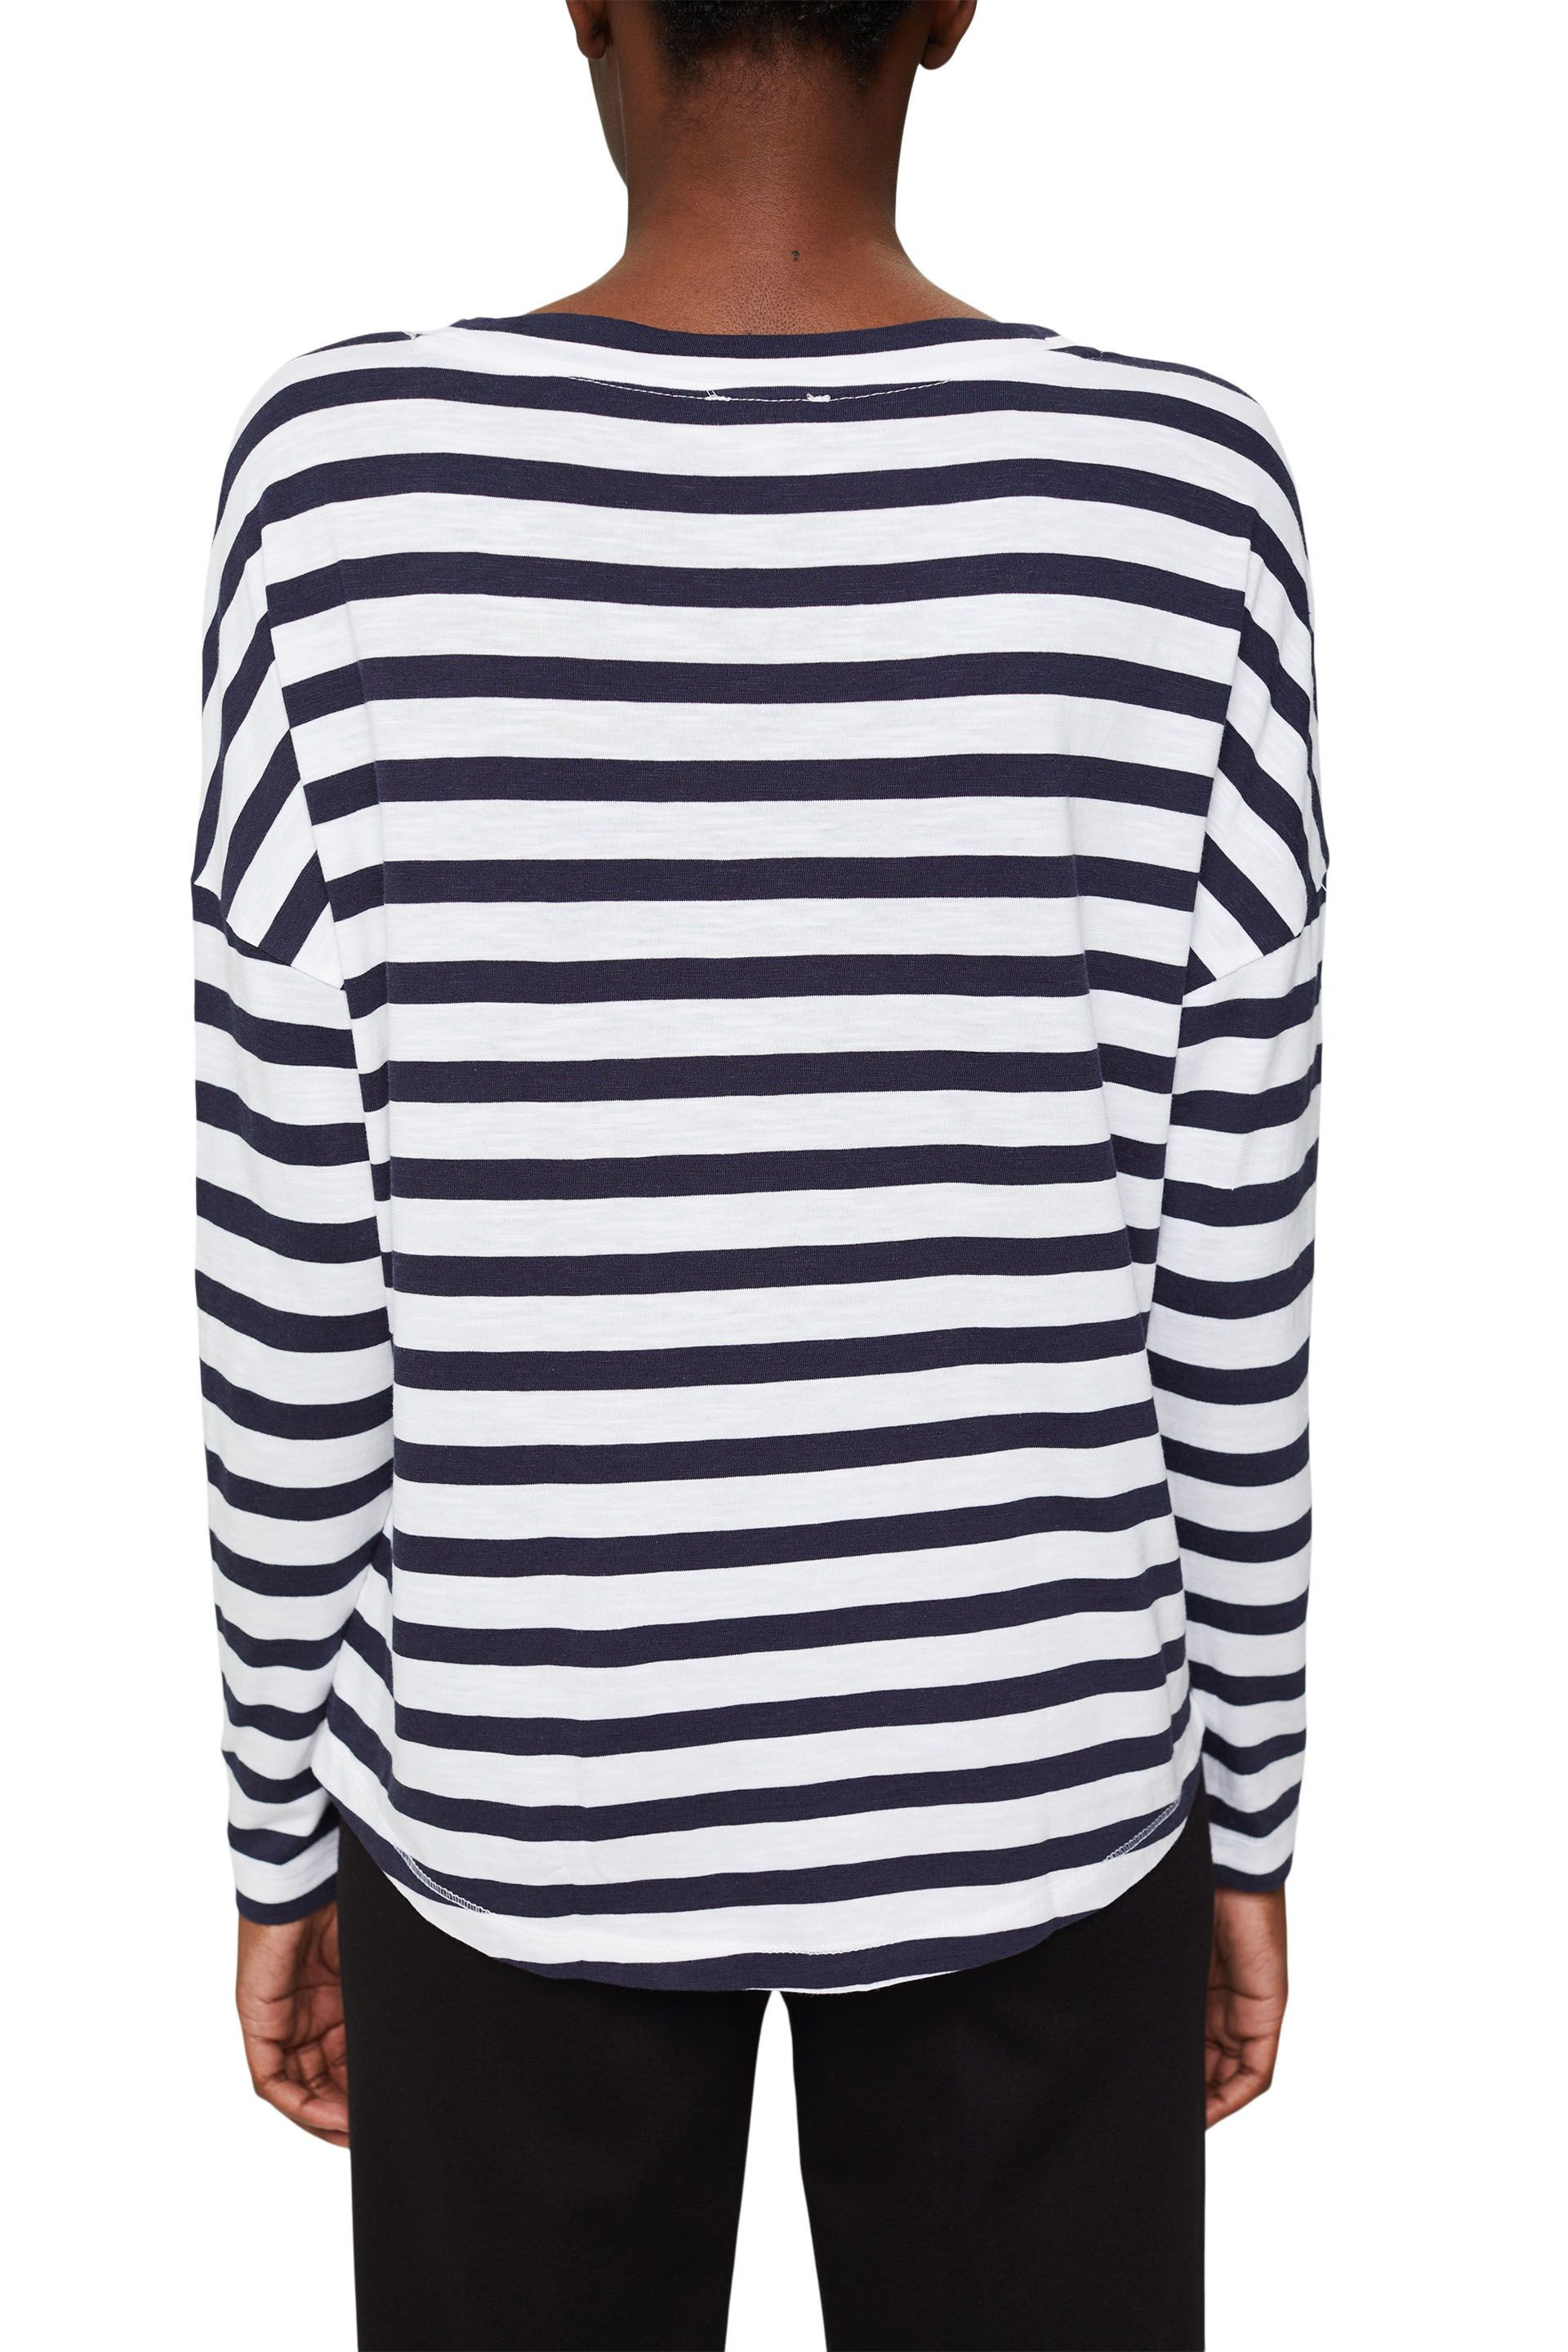 Striped T-shirt with pocket, White, large image number 2